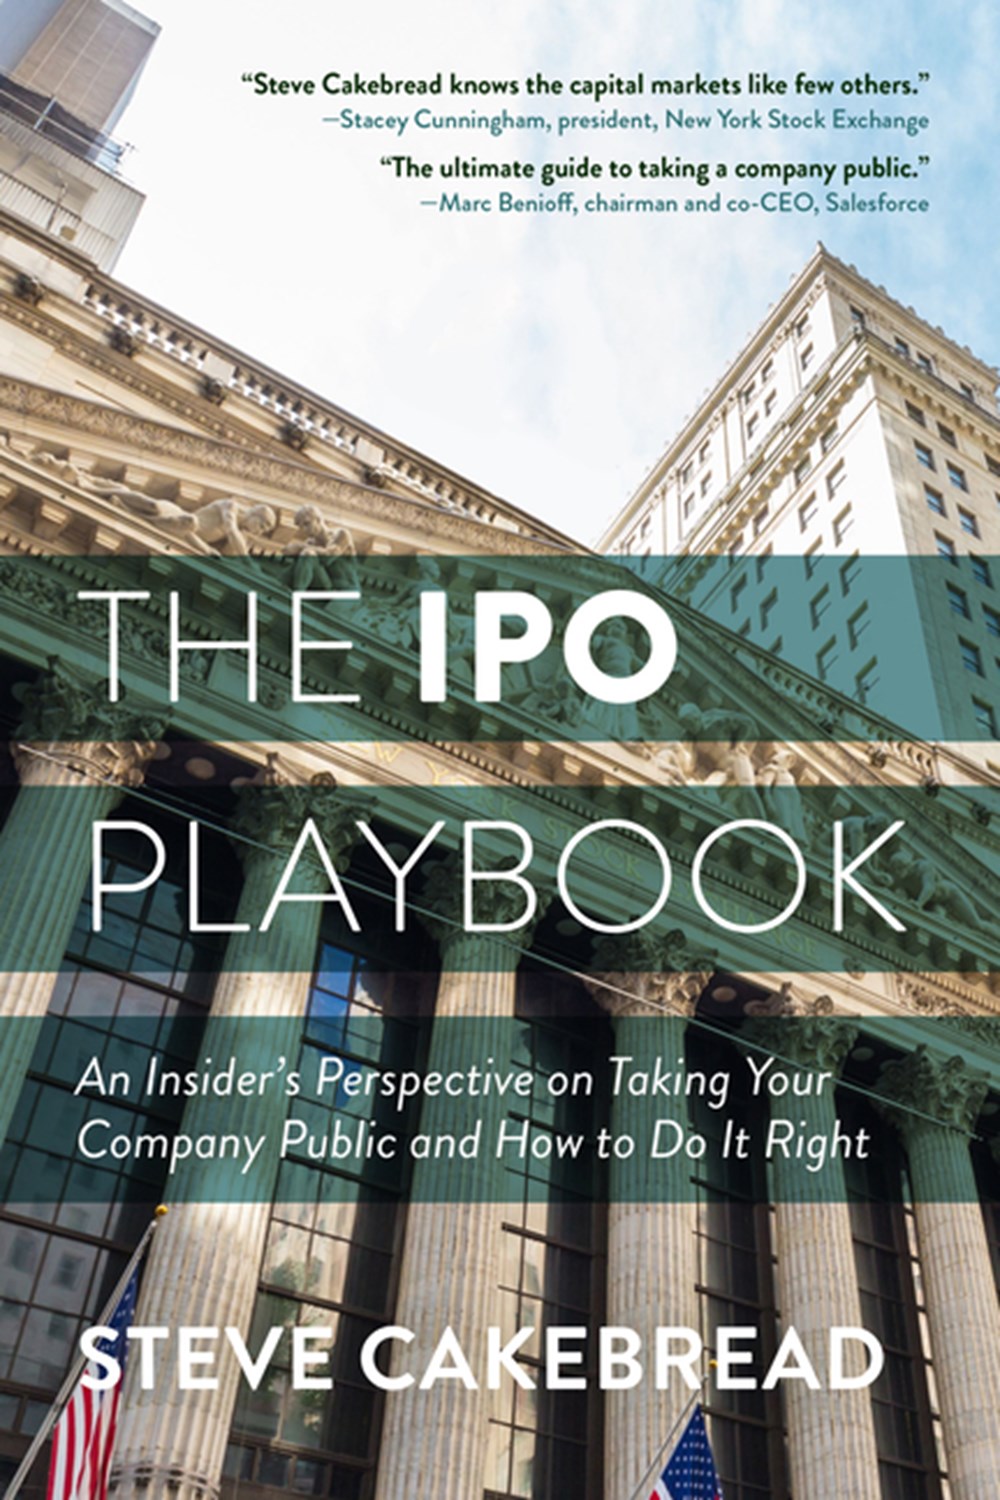 IPO Playbook: An Insider's Perspective on Taking Your Company Public and How to Do It Right